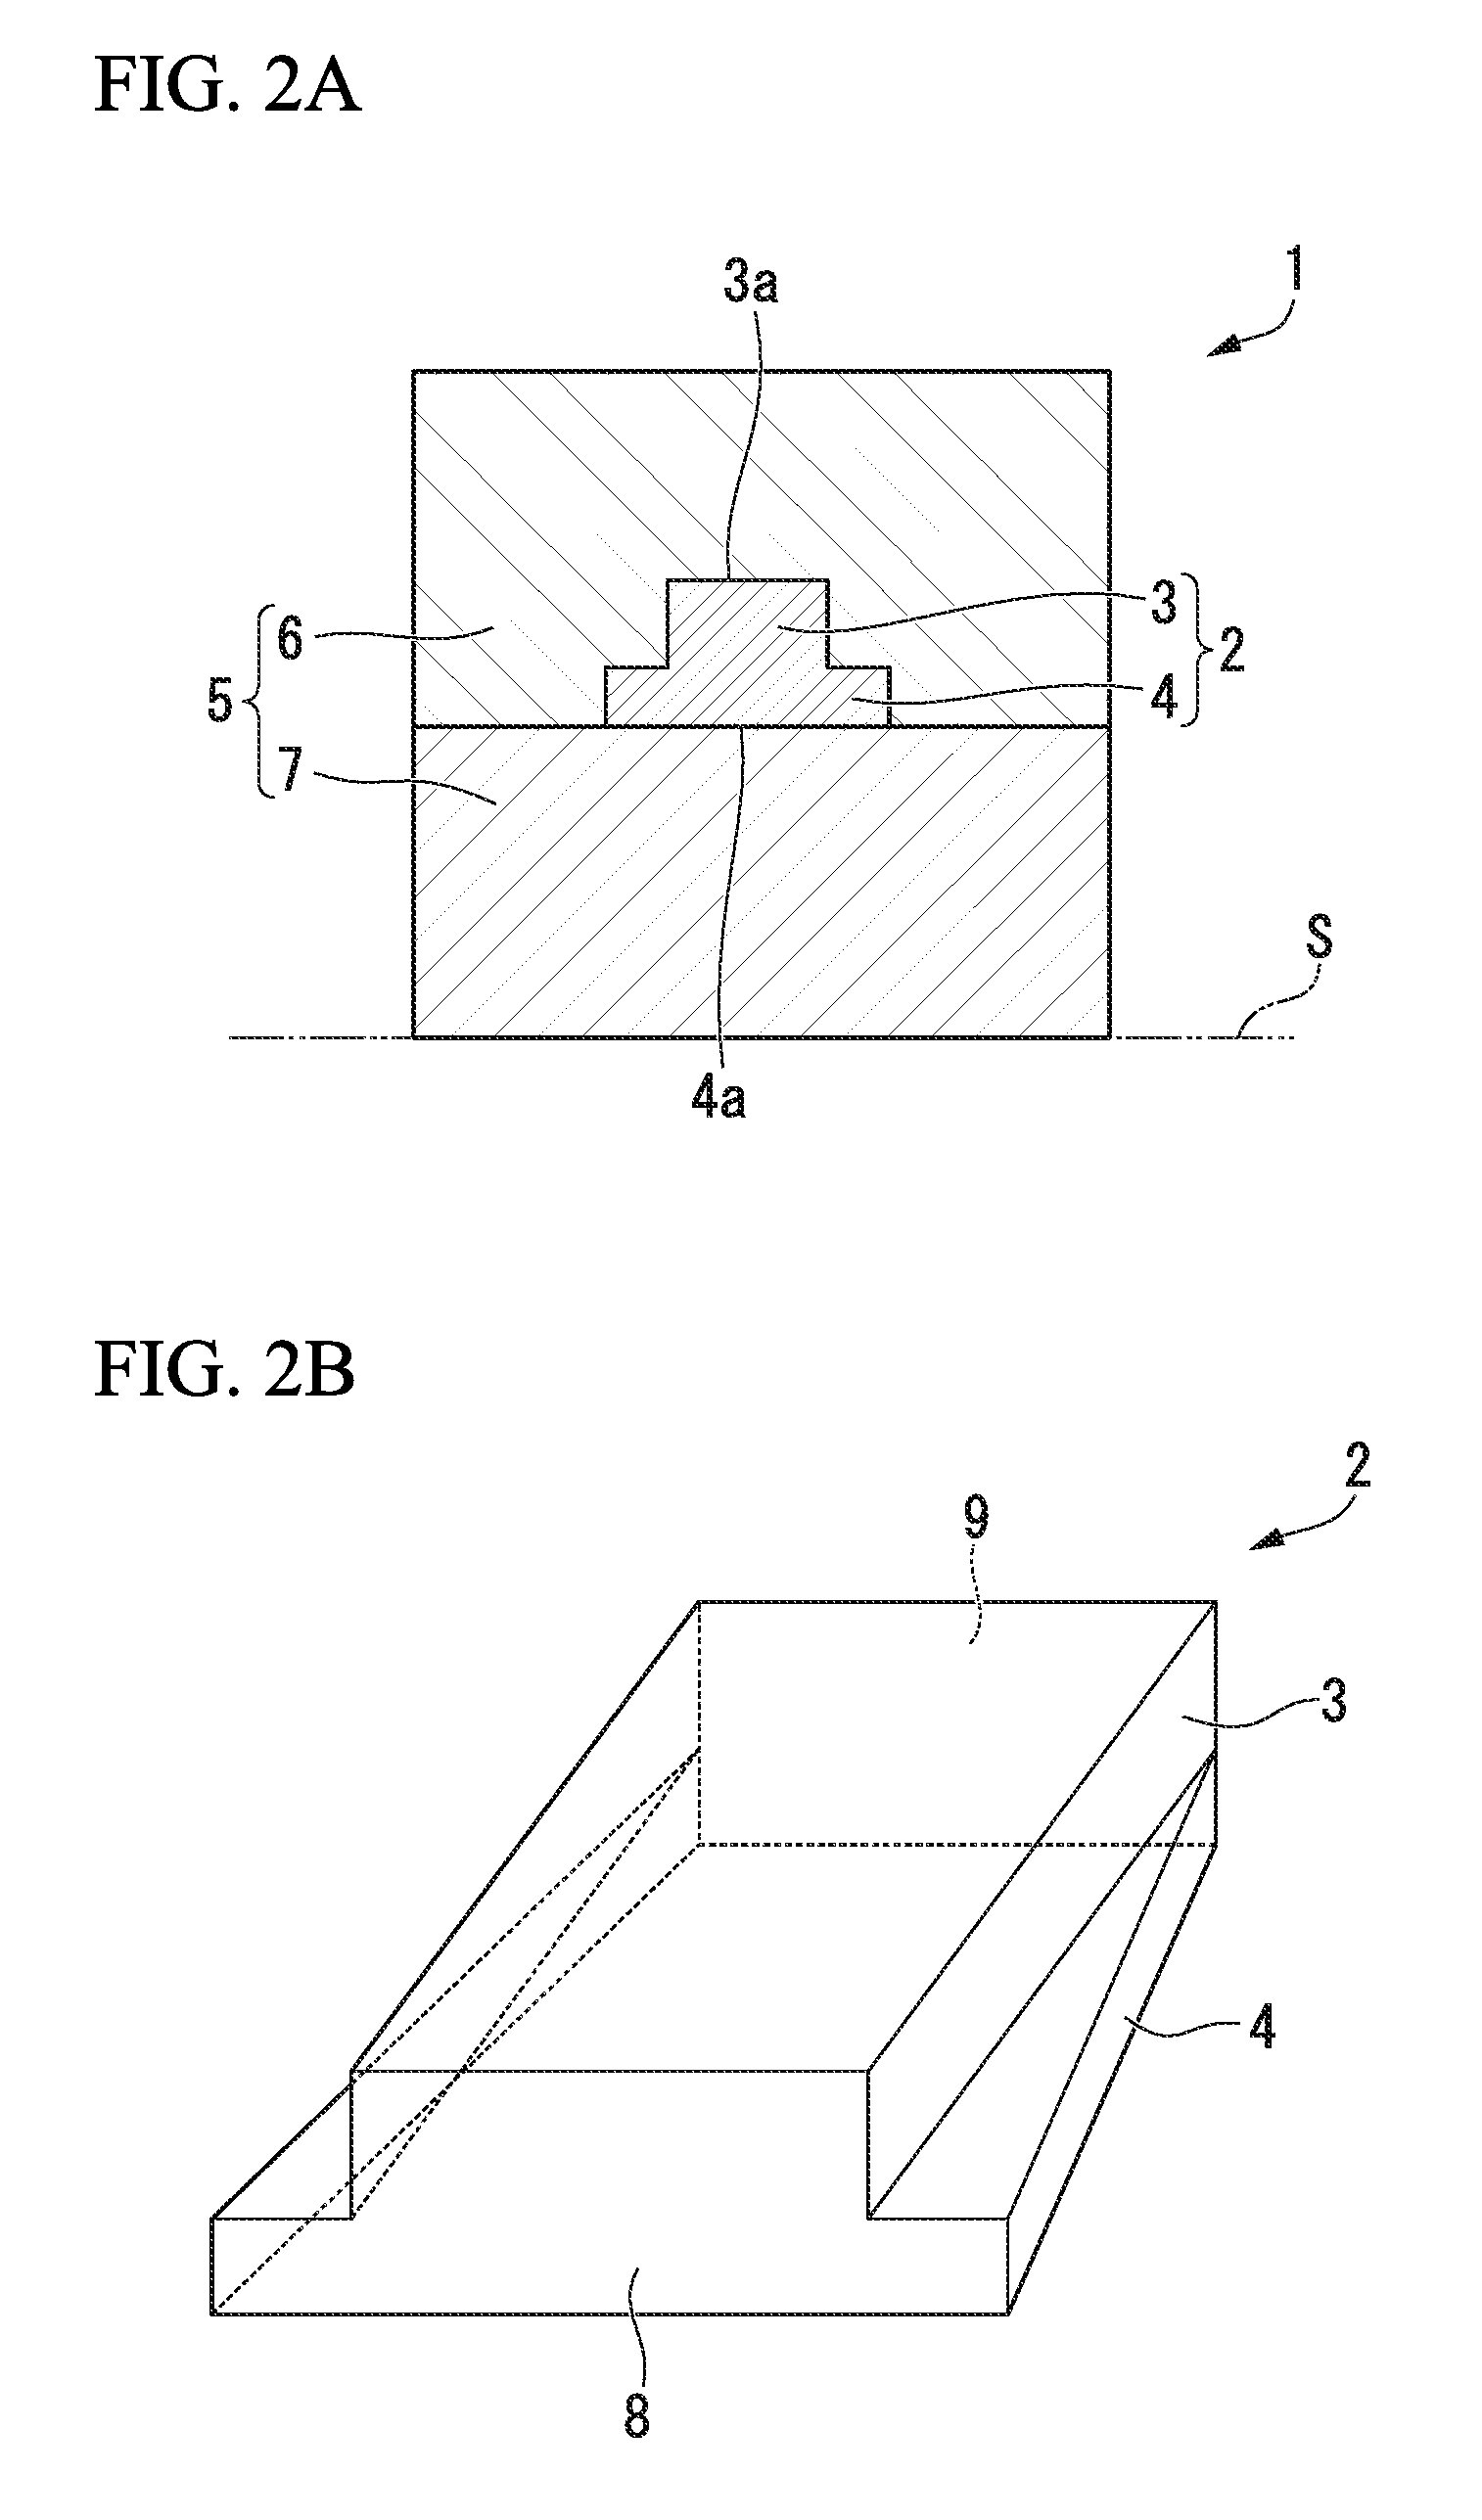 High-order polarization conversion device, optical waveguide device, and DP-QPSK modulator